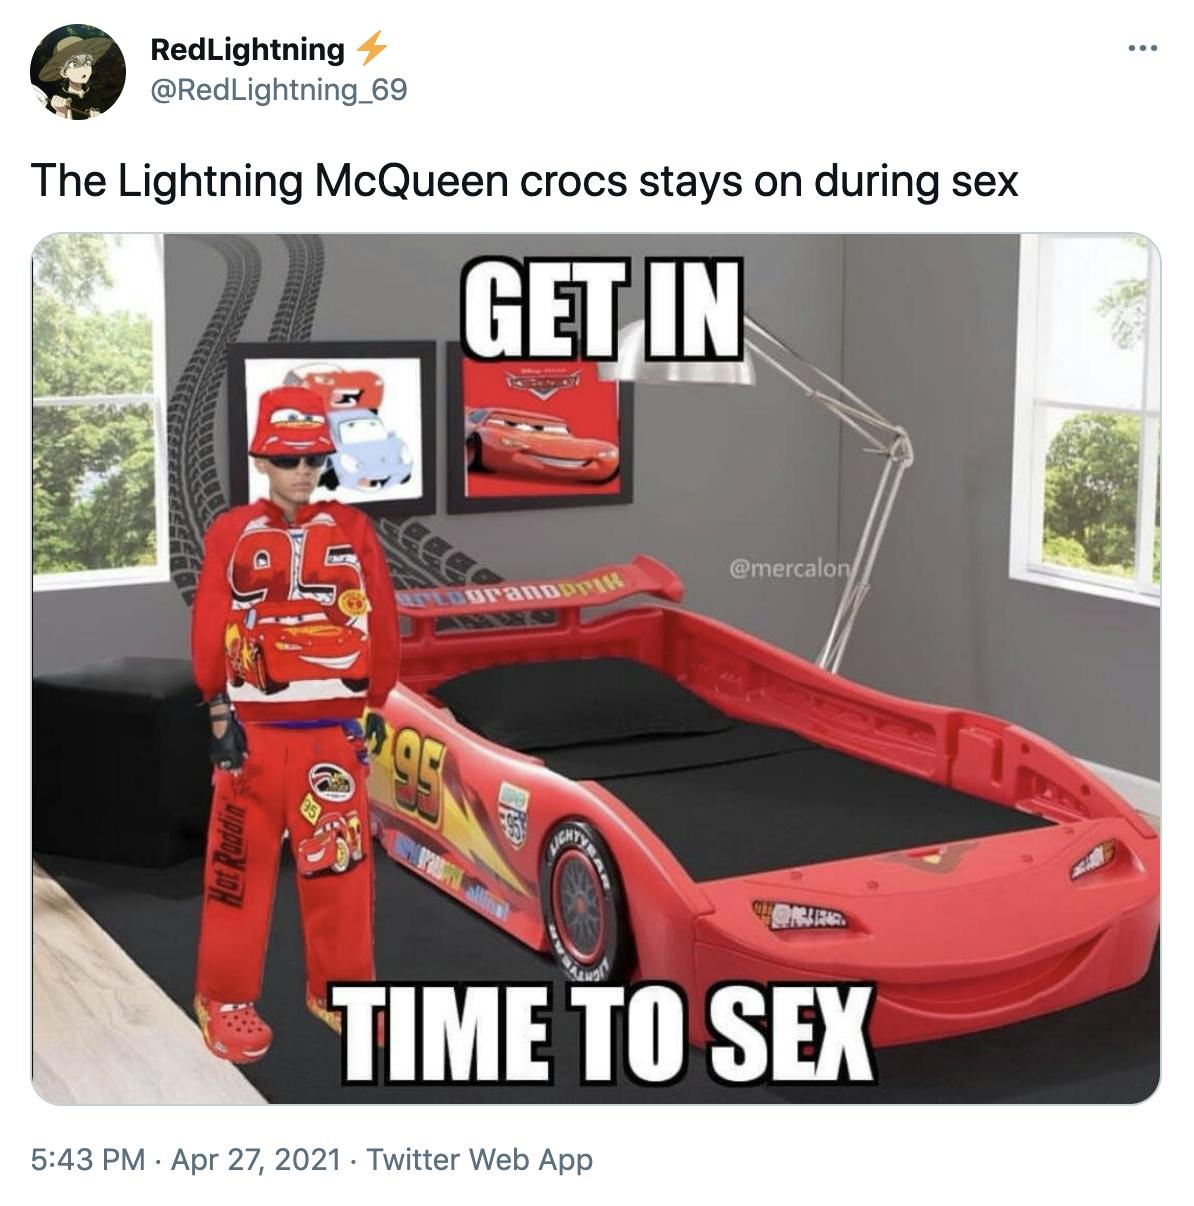 'The Lightning McQueen crocs stays on during sex' cgi figure wearing head to toe Lightning McQueen clothes by a Lightning McQueen racer bed and other accessories with the text 'get in time to sex'